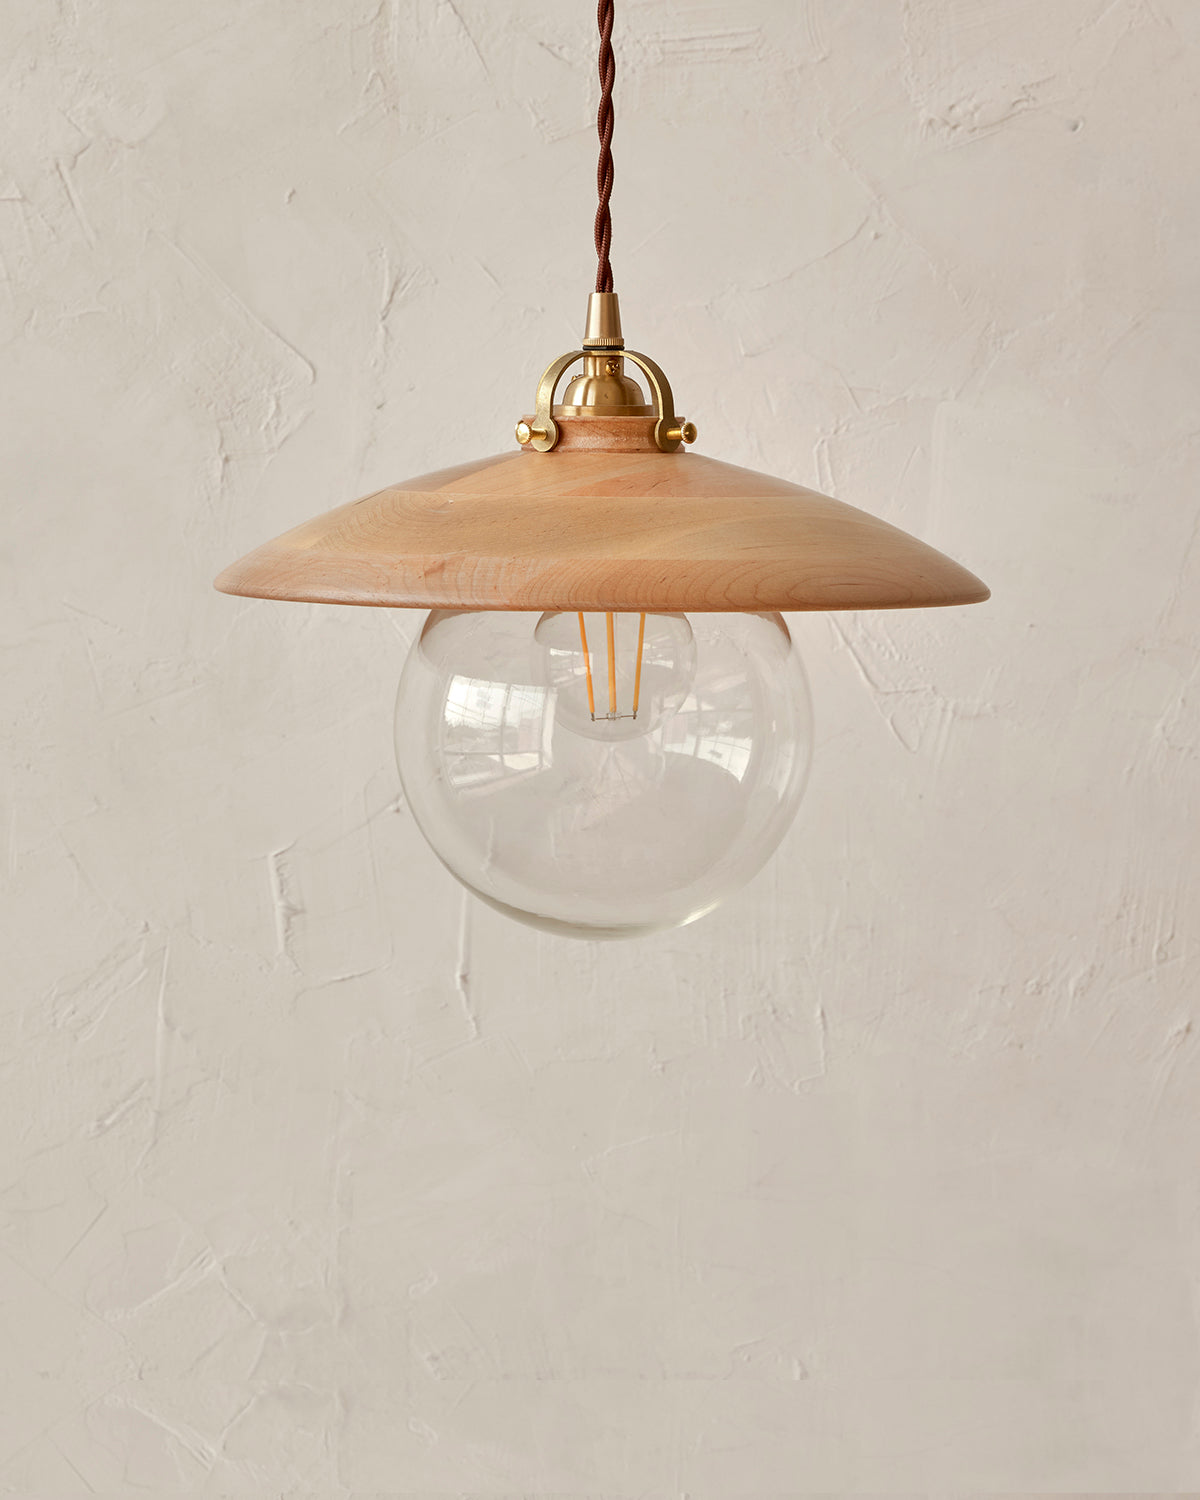 Pendant light with large clear glass globe and decorative wooden natural maple shade